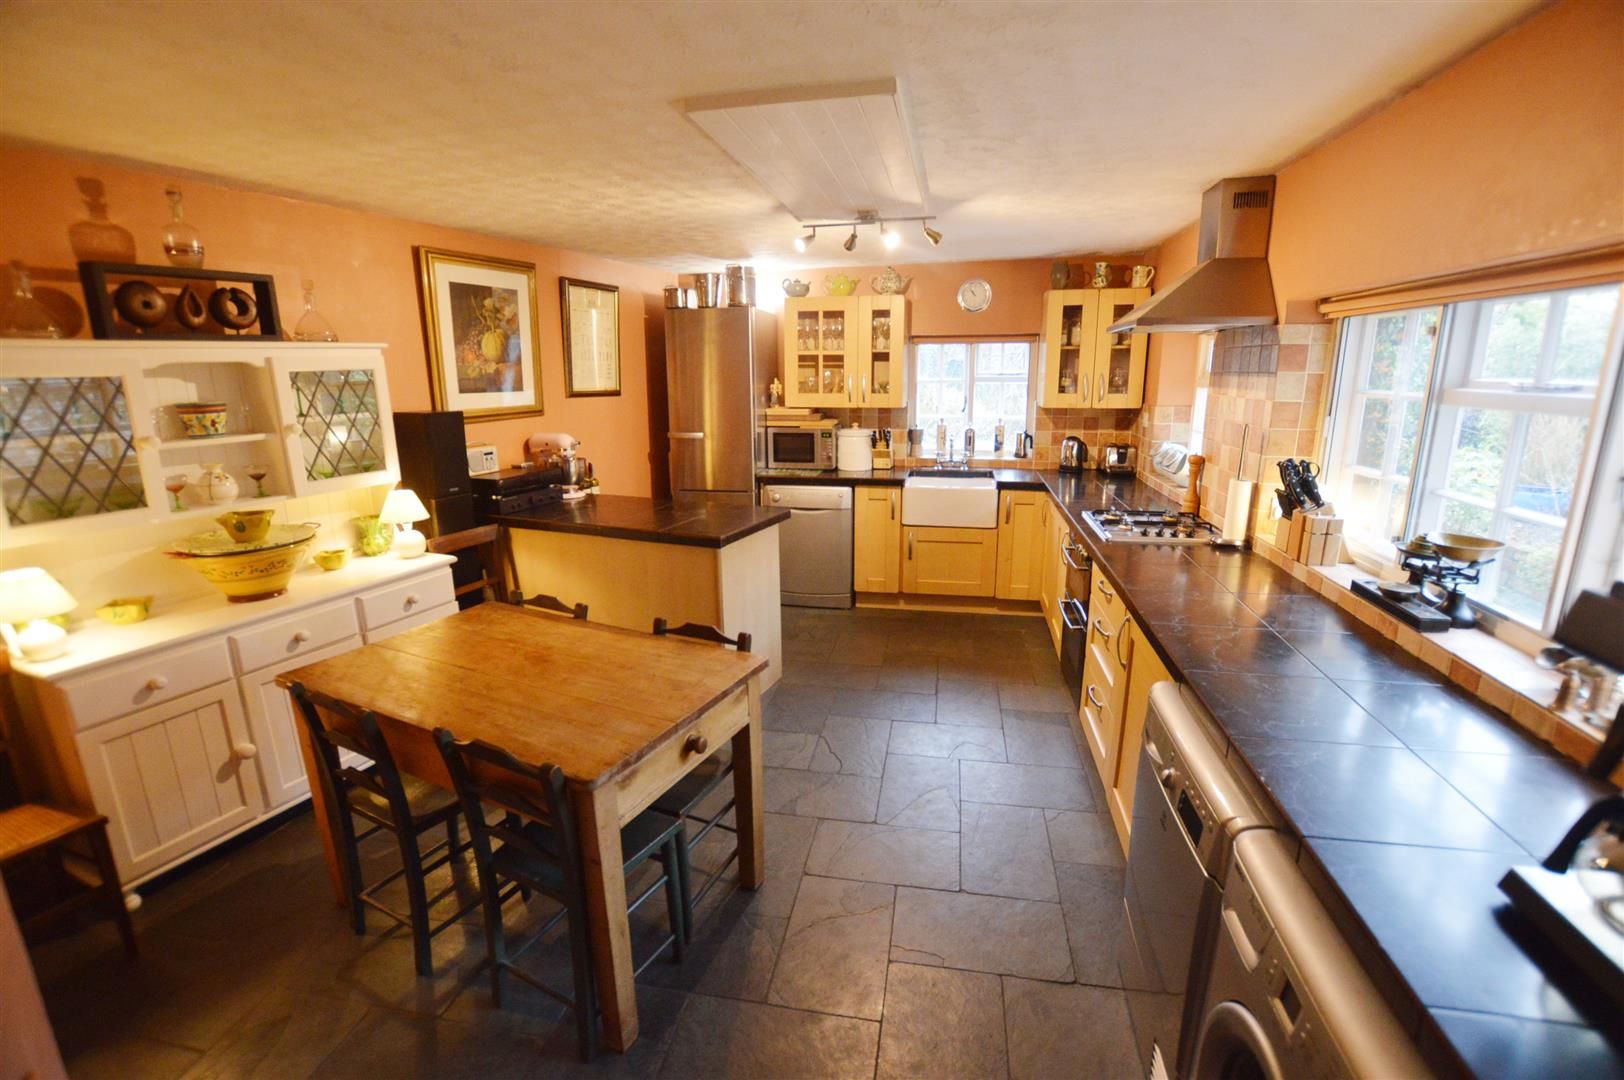 5 bed town house for sale in Leominster 5